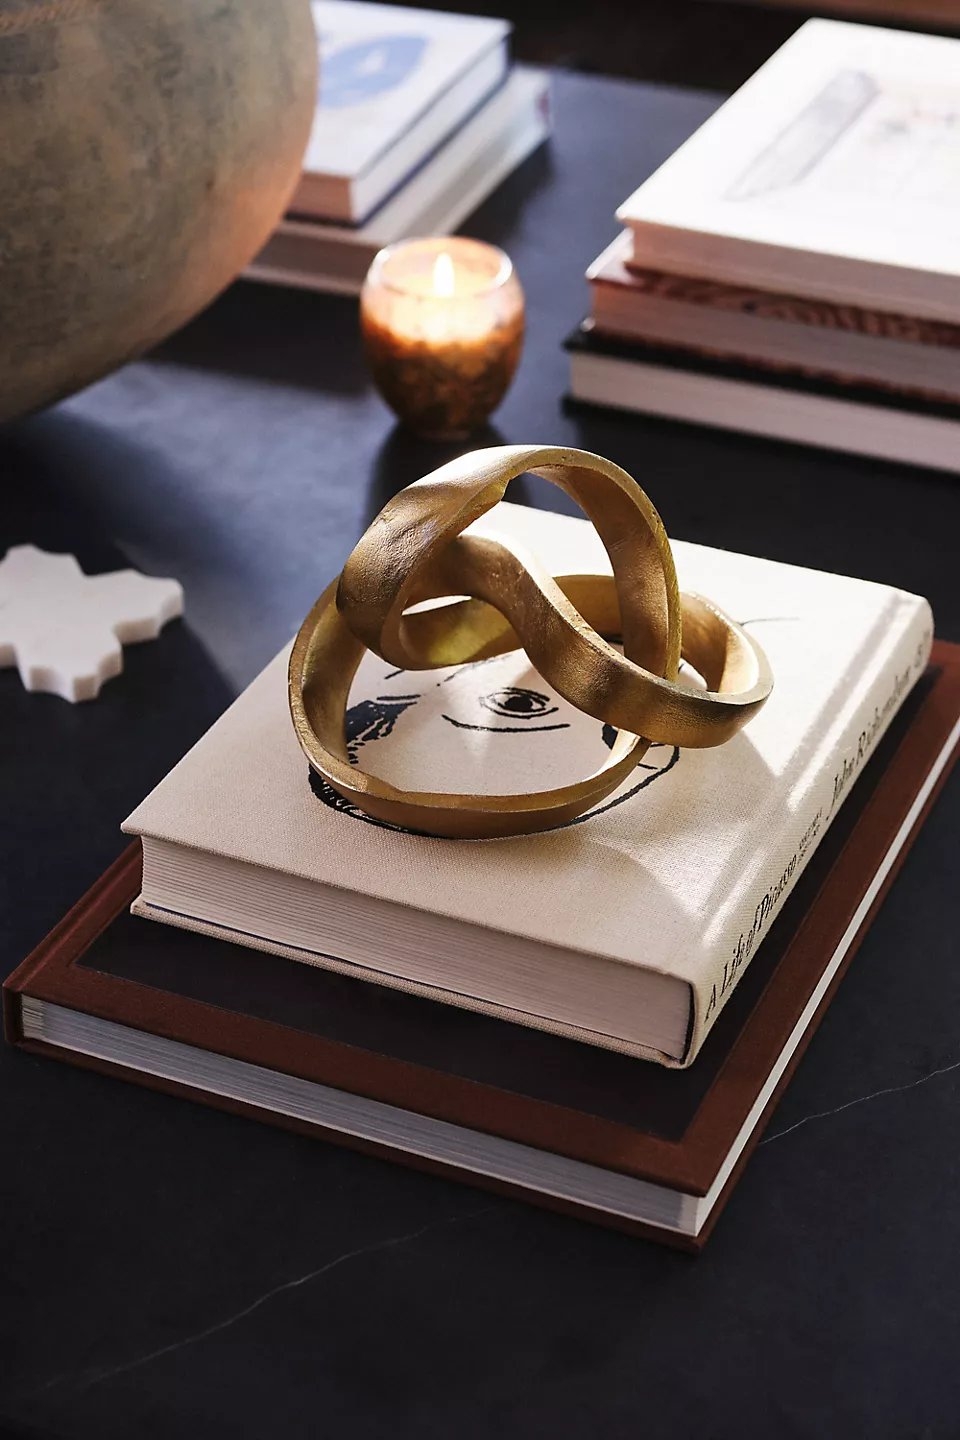 Knotted Decorative Object By Anthropologie in Gold - Image 2